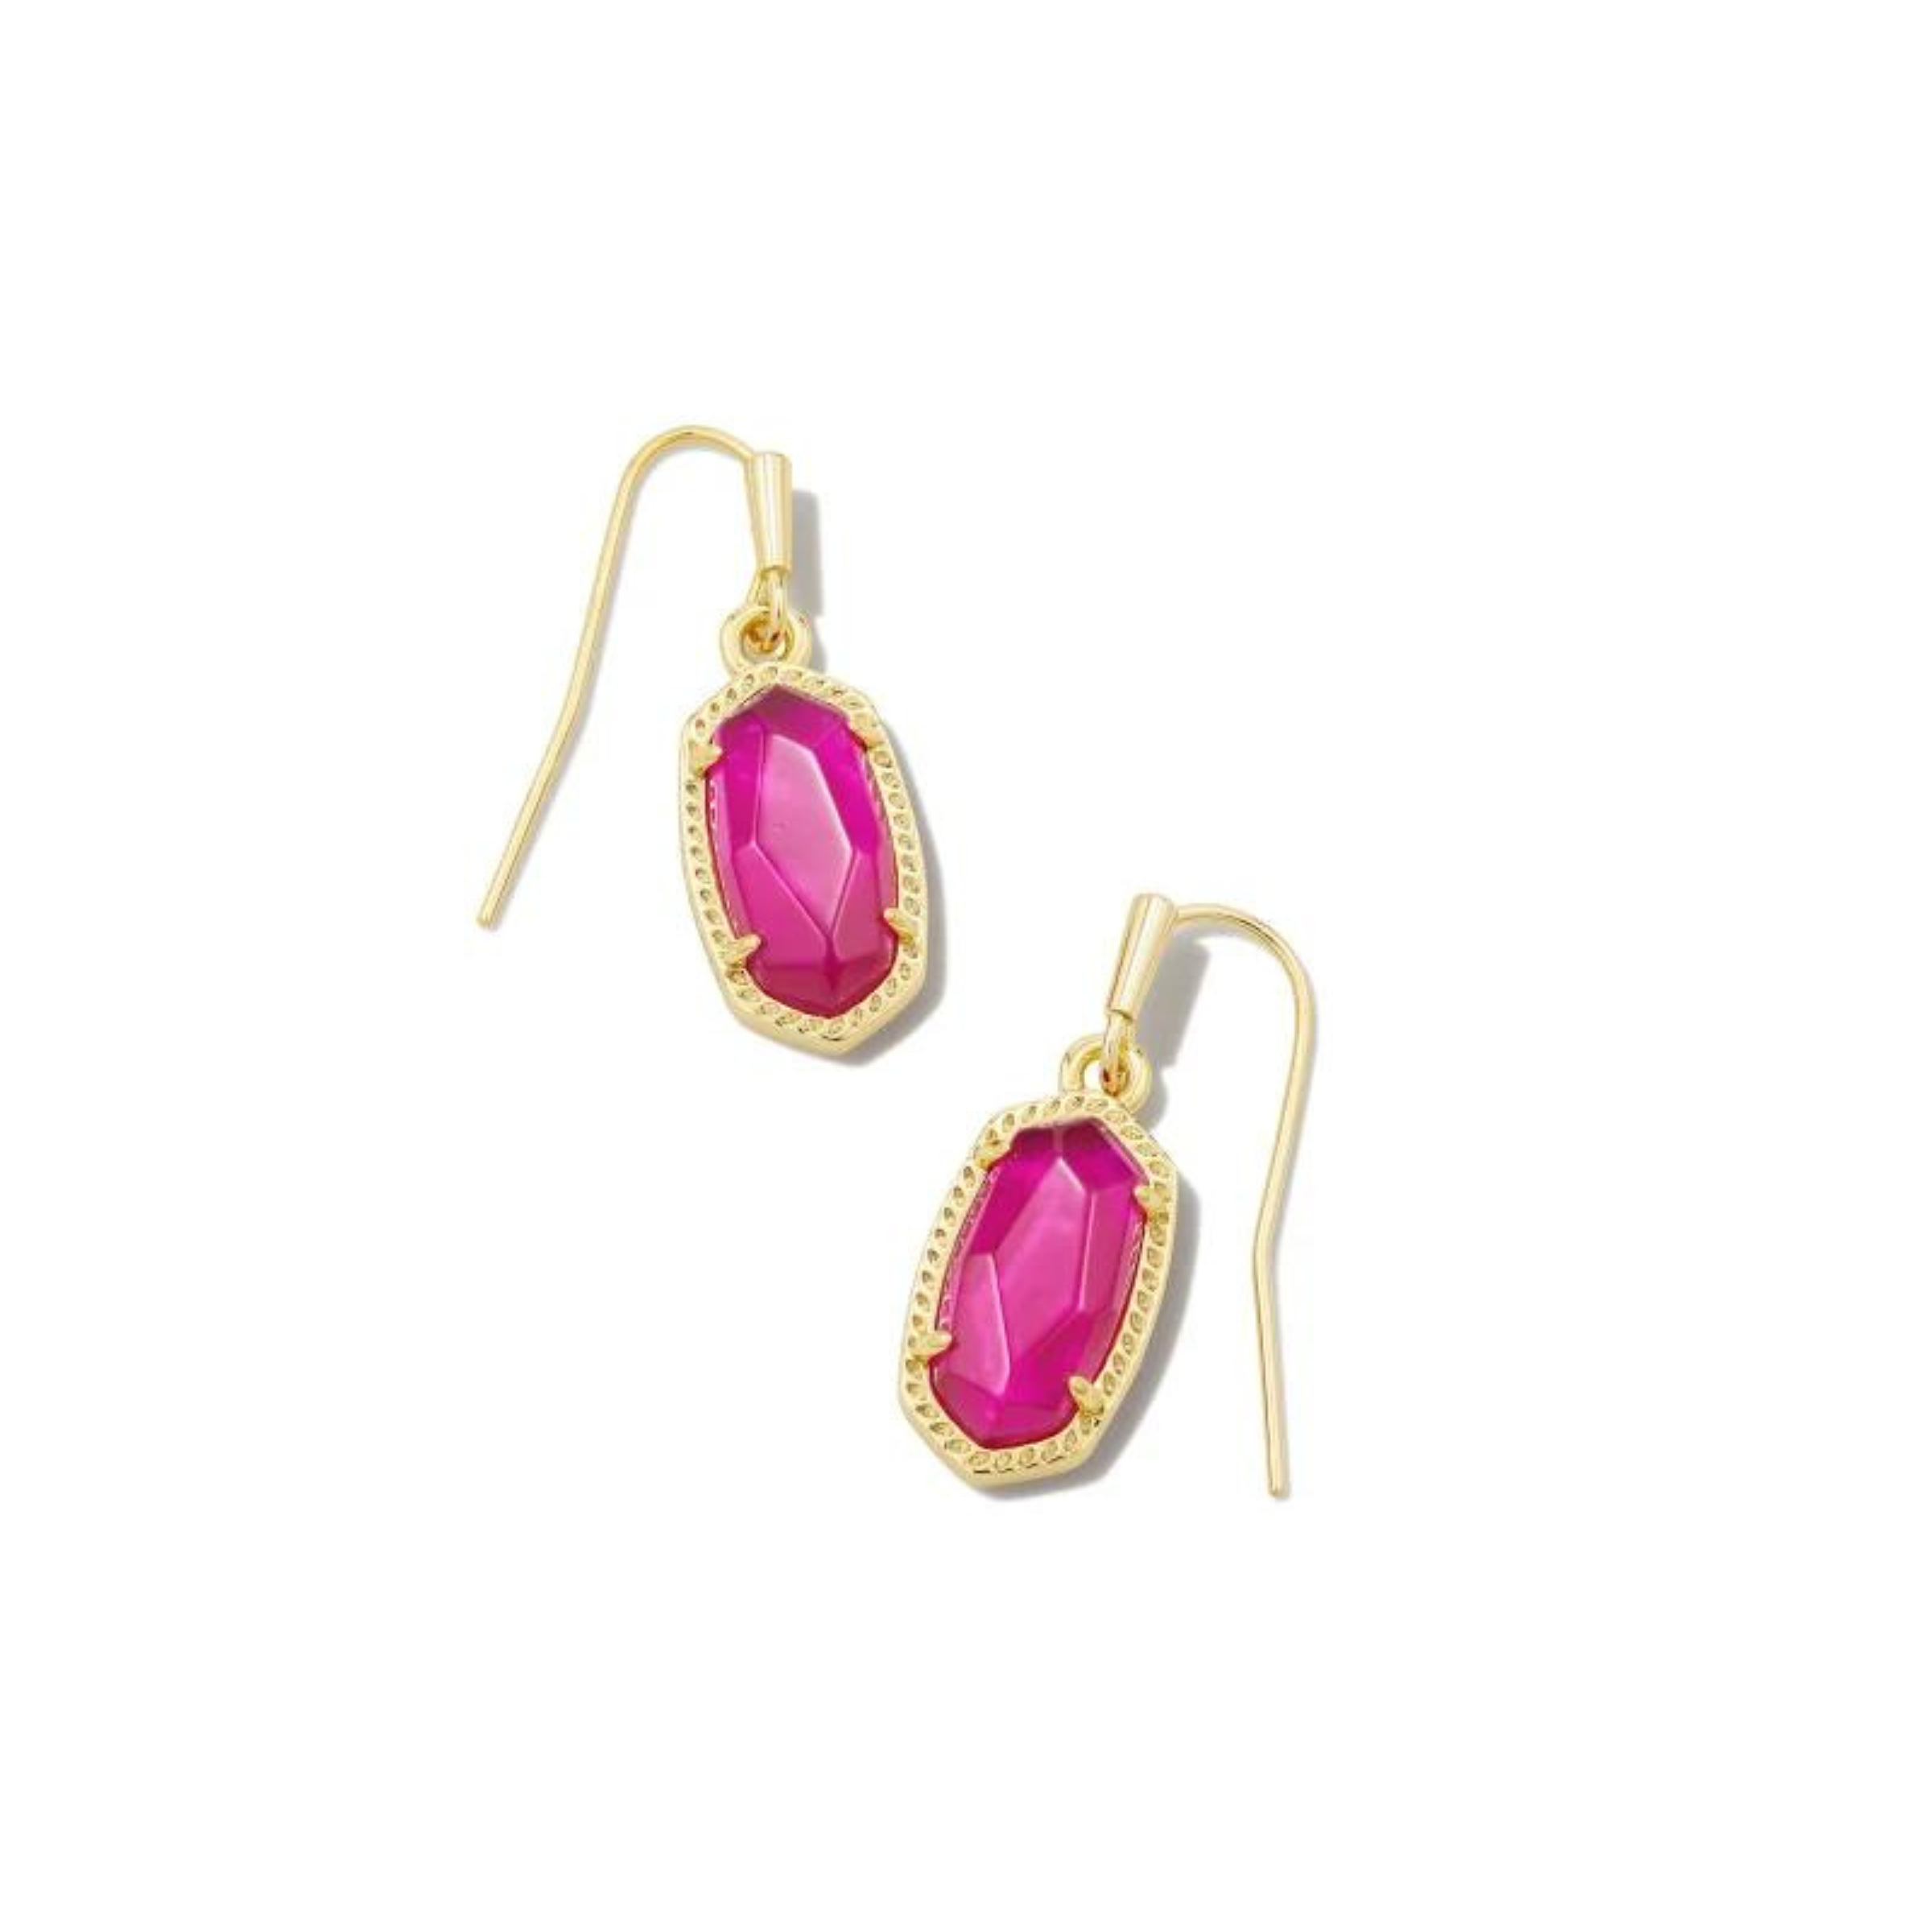 Gold, small oval drop earrings with a pink stone. These earrings are pictured on a white earring holder on a white background.